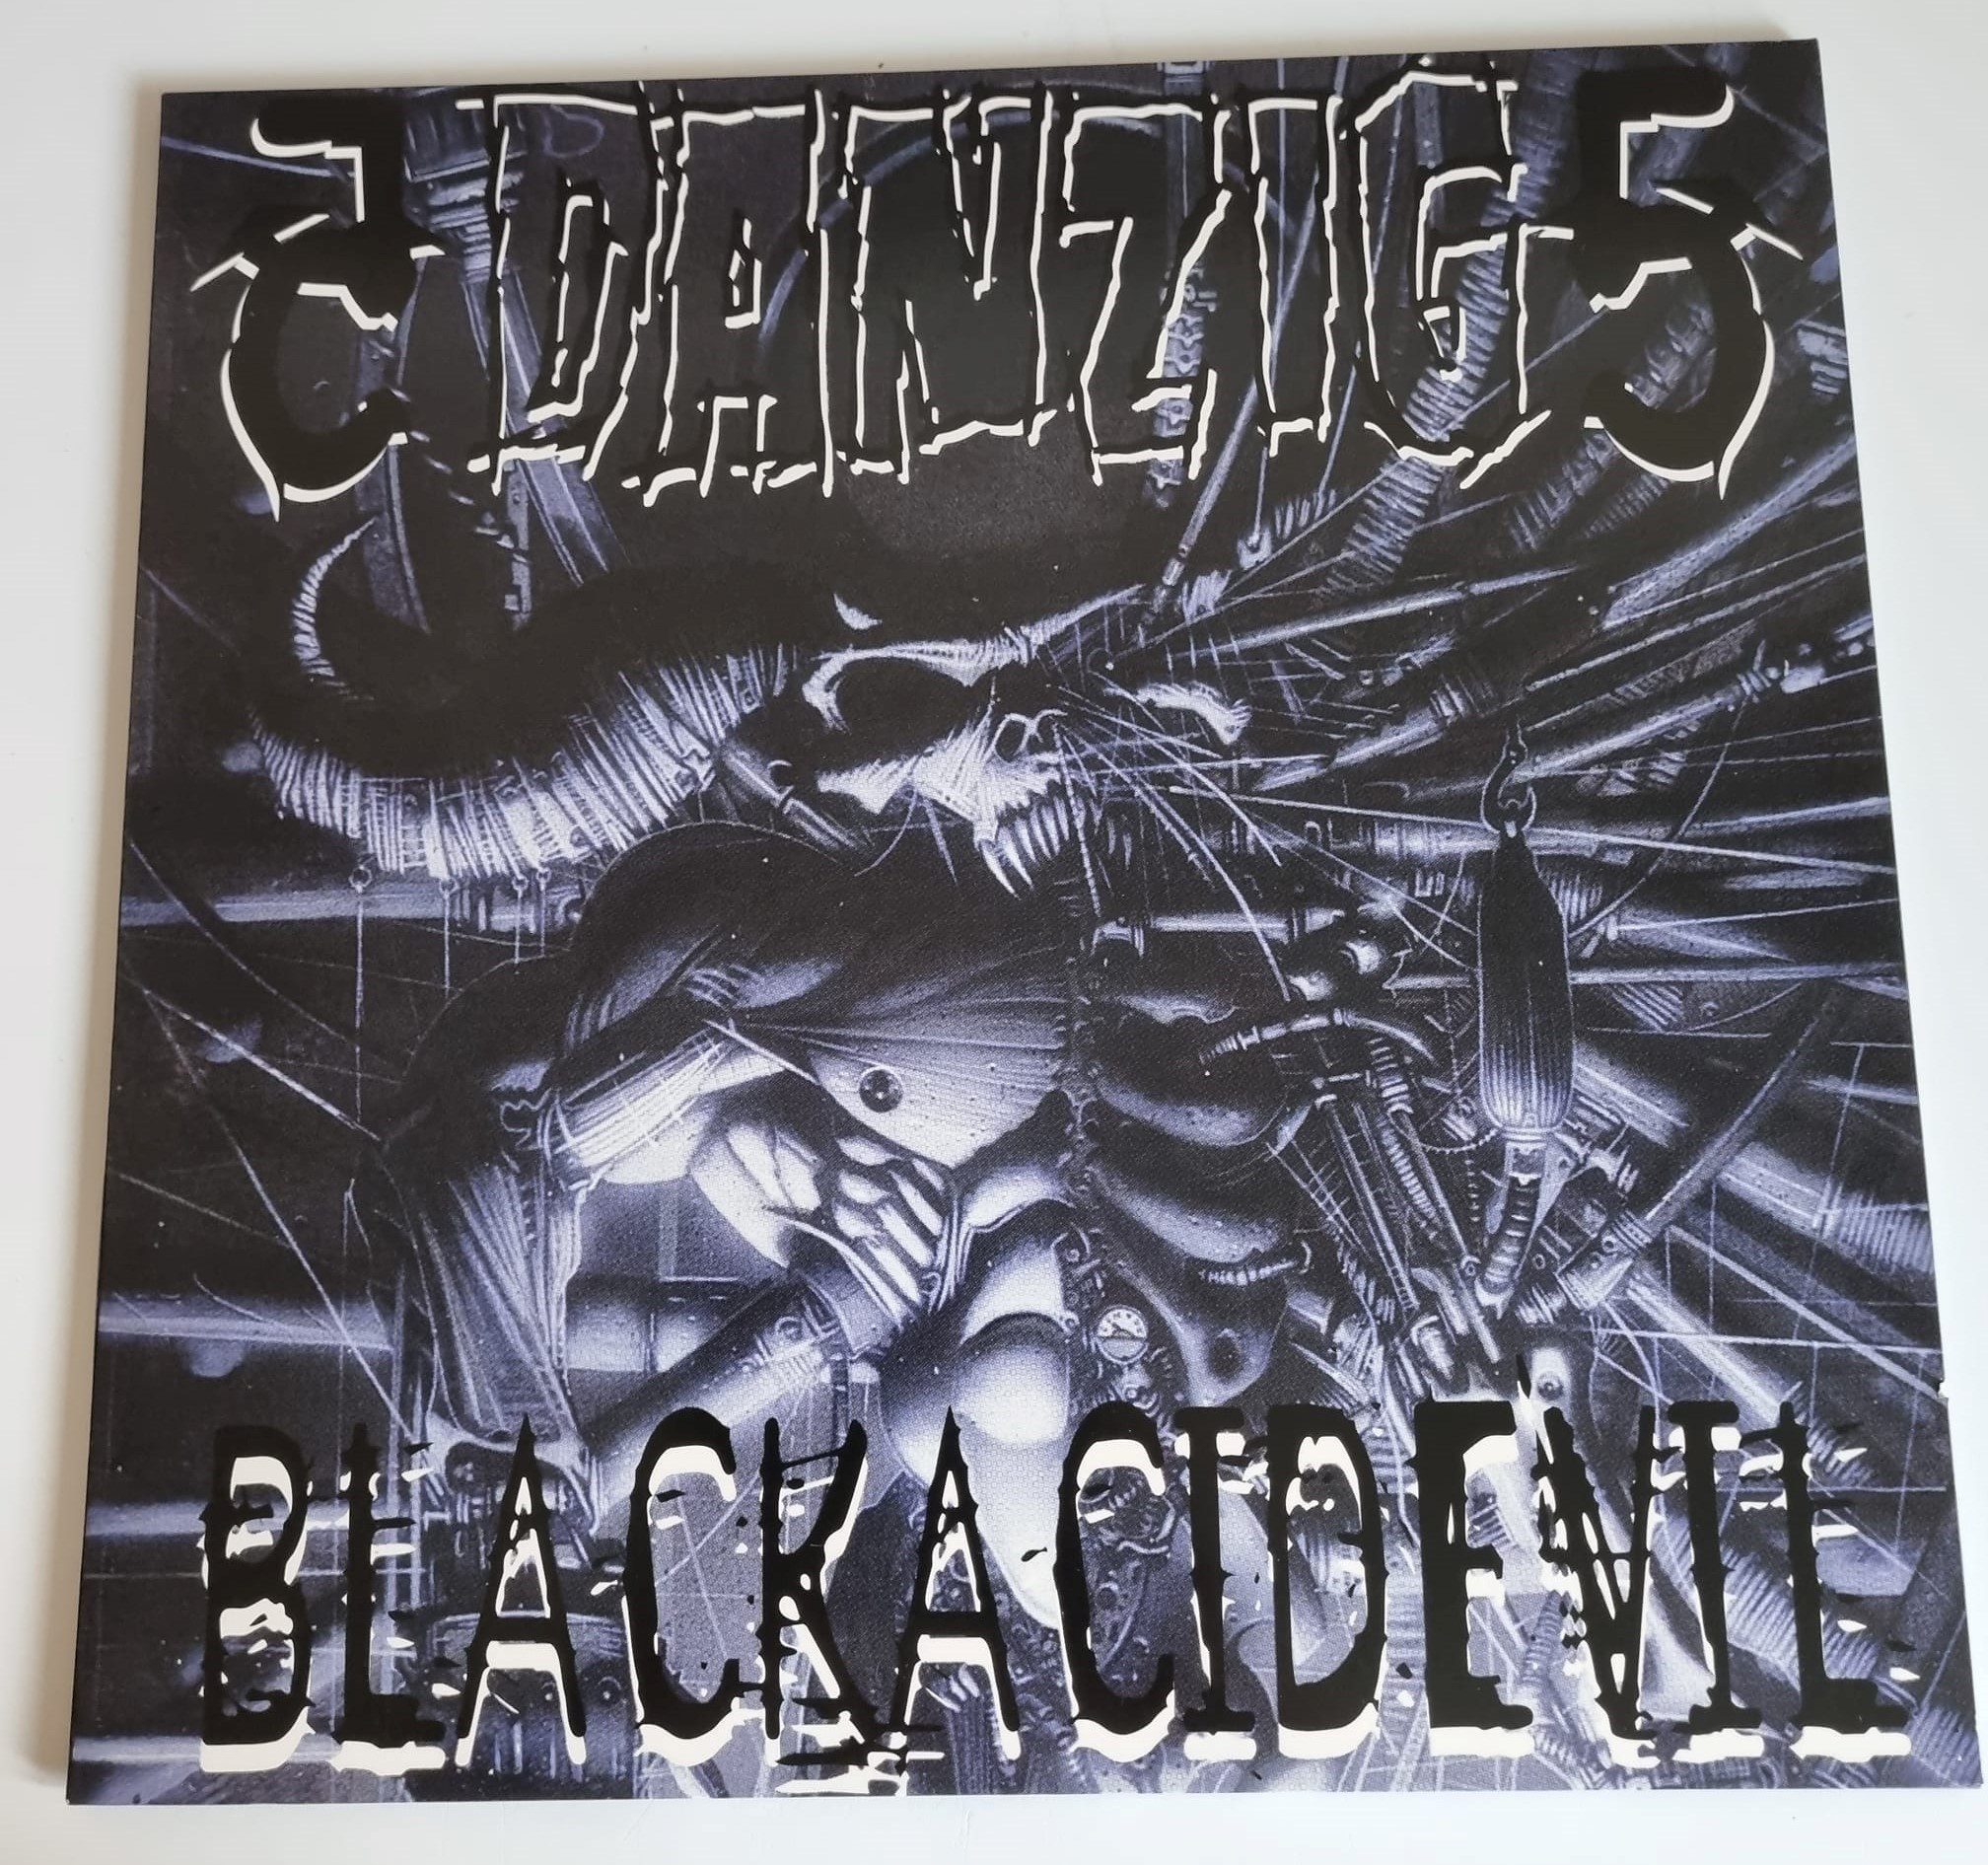 Buy this rare Danzig record by clicking here